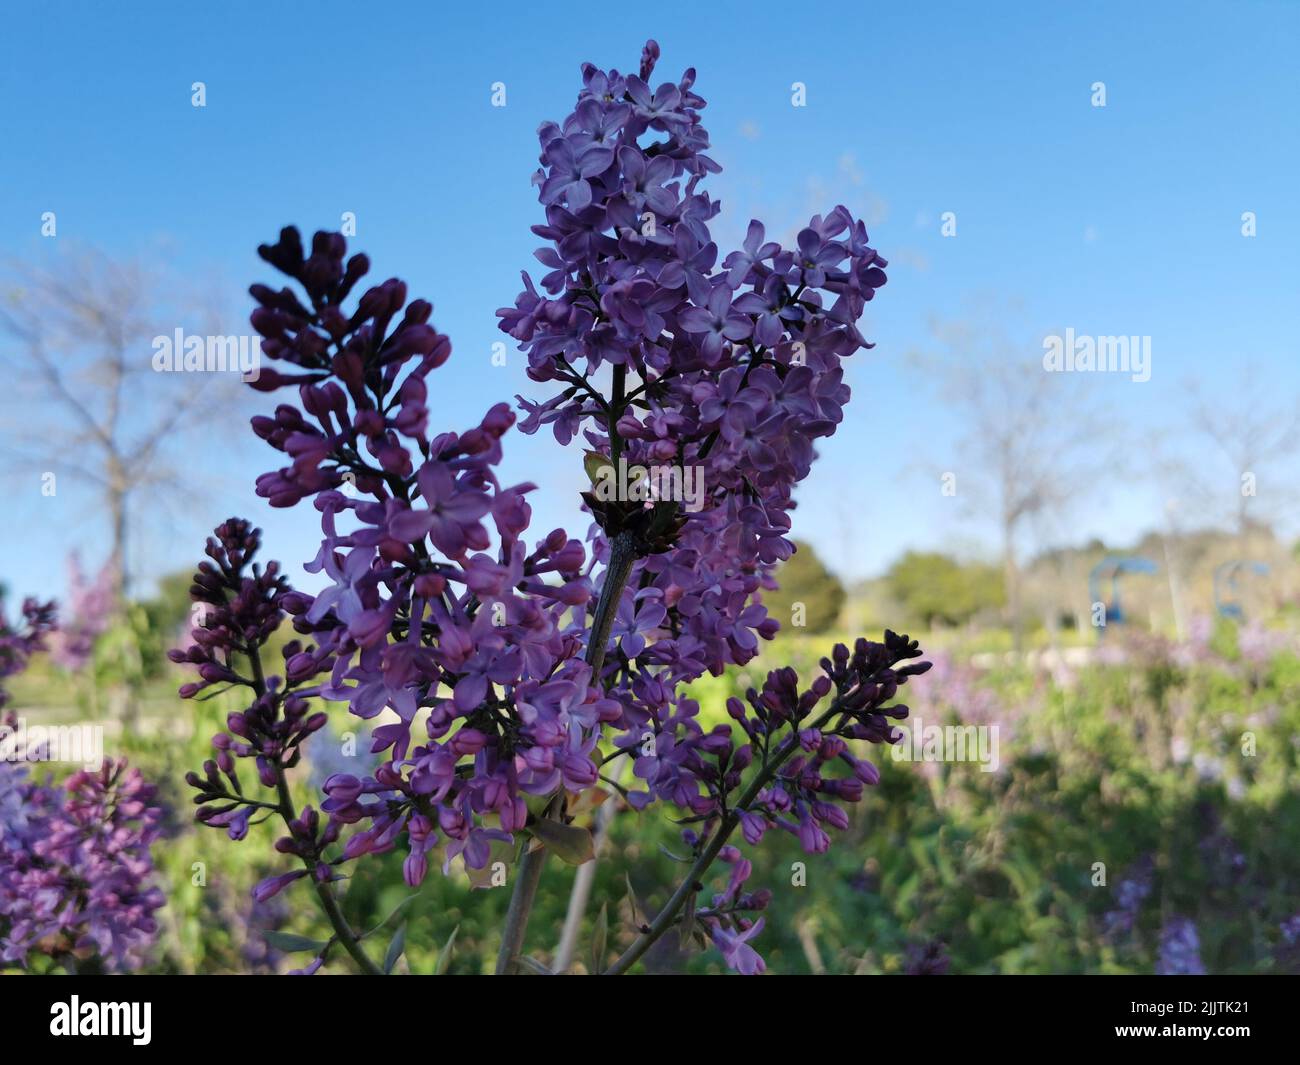 A branch of beautiful Lilac flowers in spring in a blurred background Stock Photo